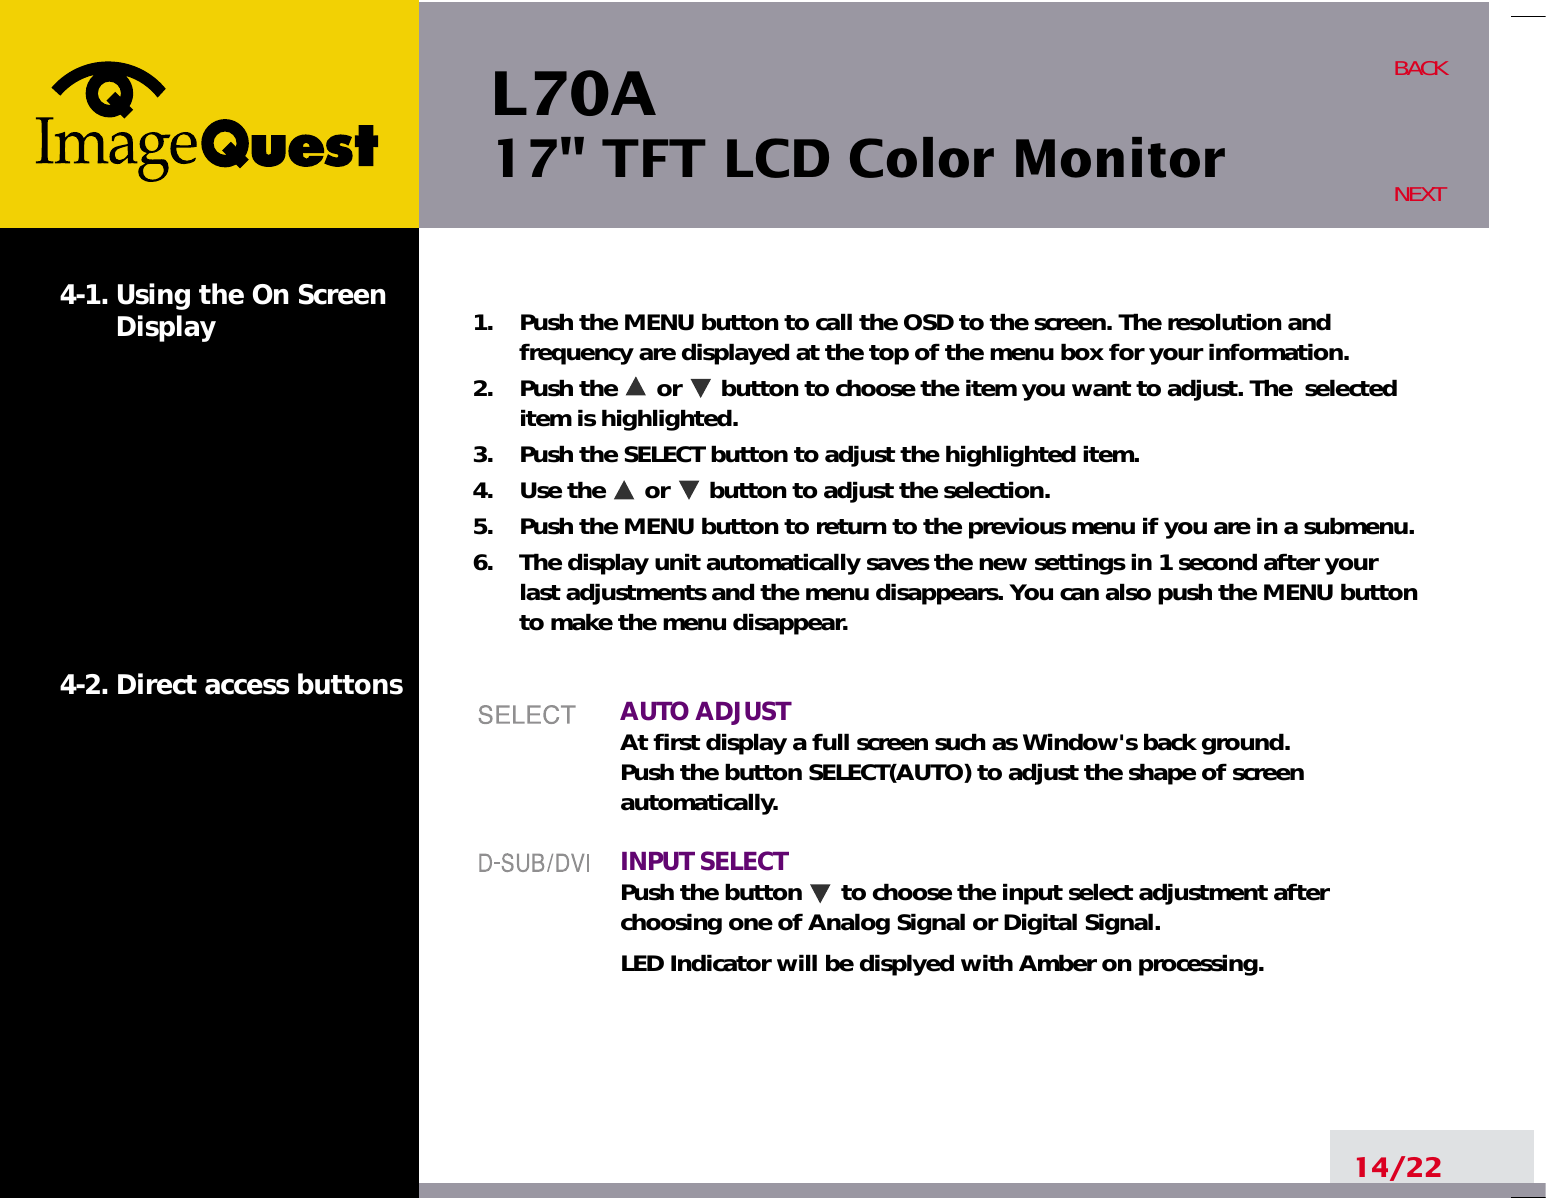 L70A17&quot; TFT LCD Color Monitor14/22BACKNEXT1.    Push the MENU button to call the OSD to the screen. The resolution andfrequency are displayed at the top of the menu box for your information.2.    Push the      or      button to choose the item you want to adjust. The  selecteditem is highlighted.3.    Push the SELECT button to adjust the highlighted item. 4.    Use the      or      button to adjust the selection.5.    Push the MENU button to return to the previous menu if you are in a submenu.6.    The display unit automatically saves the new settings in 1 second after yourlast adjustments and the menu disappears. You can also push the MENU buttonto make the menu disappear.AUTO ADJUSTAt first display a full screen such as Window&apos;s back ground.Push the button SELECT(AUTO) to adjust the shape of screenautomatically.INPUT SELECTPush the button      to choose the input select adjustment afterchoosing one of Analog Signal or Digital Signal.LED Indicator will be displyed with Amber on processing.4-1. Using the On ScreenDisplay 4-2. Direct access buttons